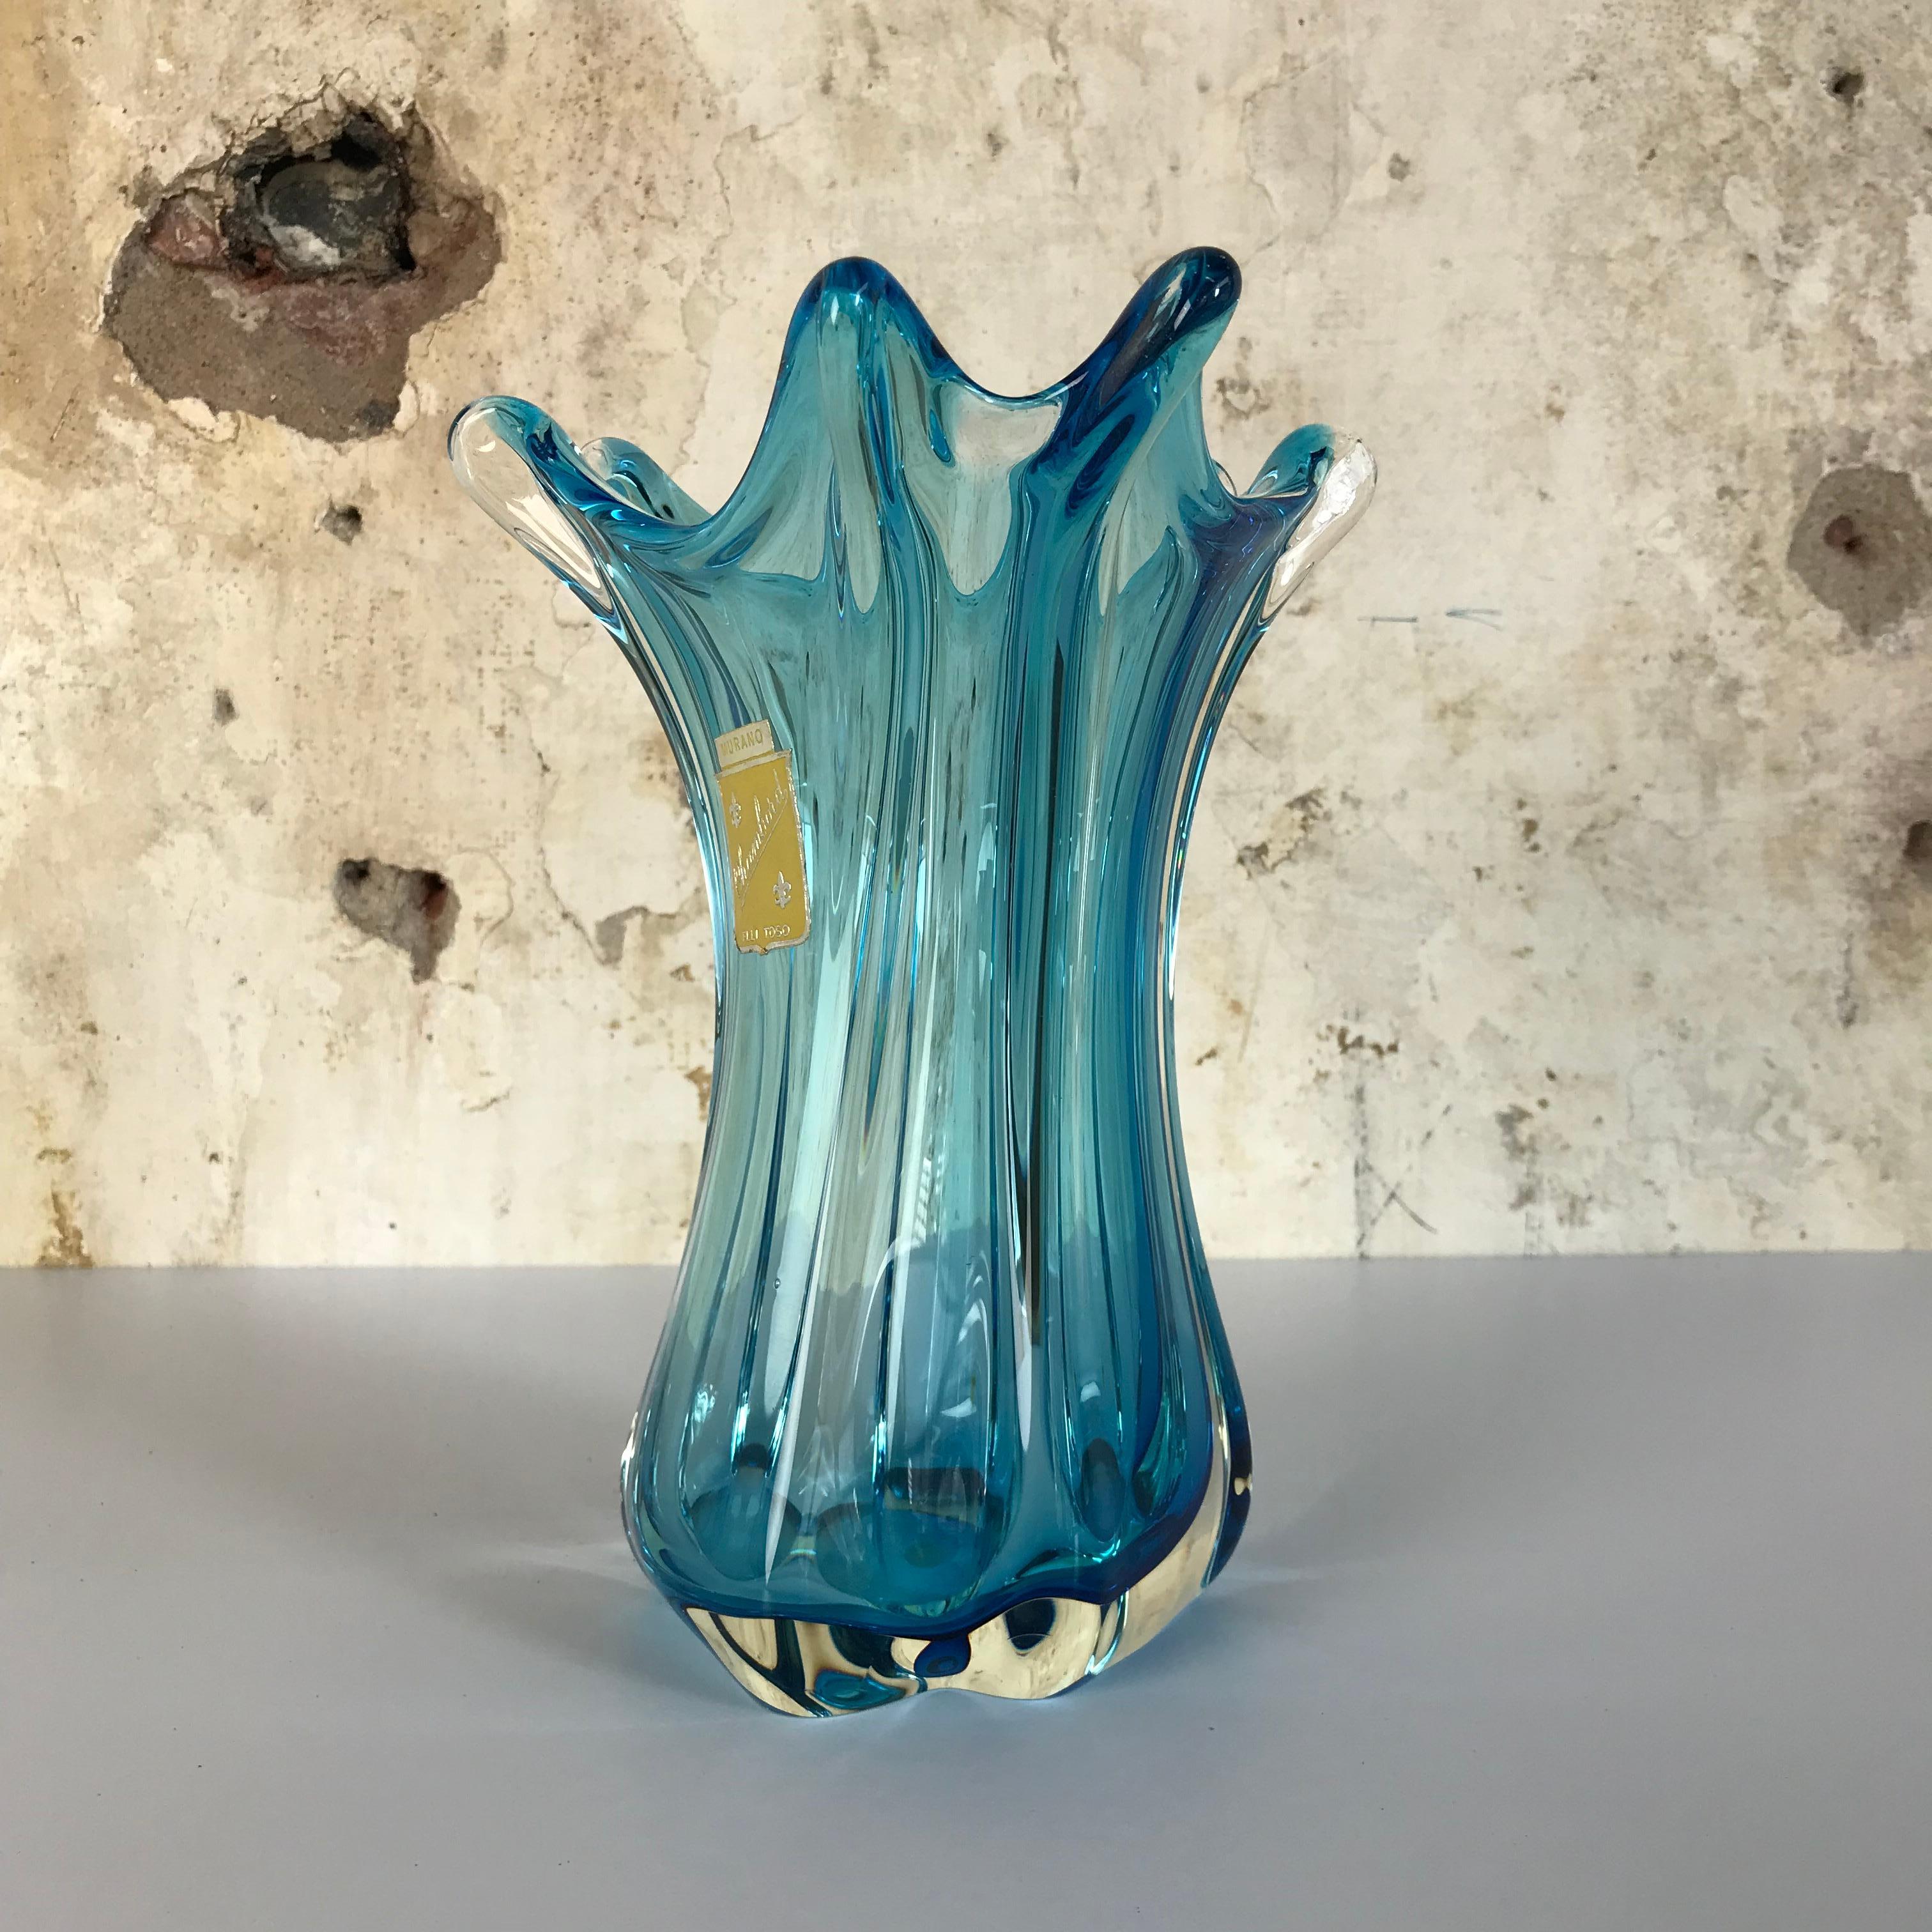 Flamboyant handblown vase from Fratelli Toso, Murano, Italy, 1950s. The vase is in excellent condition and has its original label.

Among the most famous families of glass masters in Murano we find Fratelli Toso, with over 150 years of experience